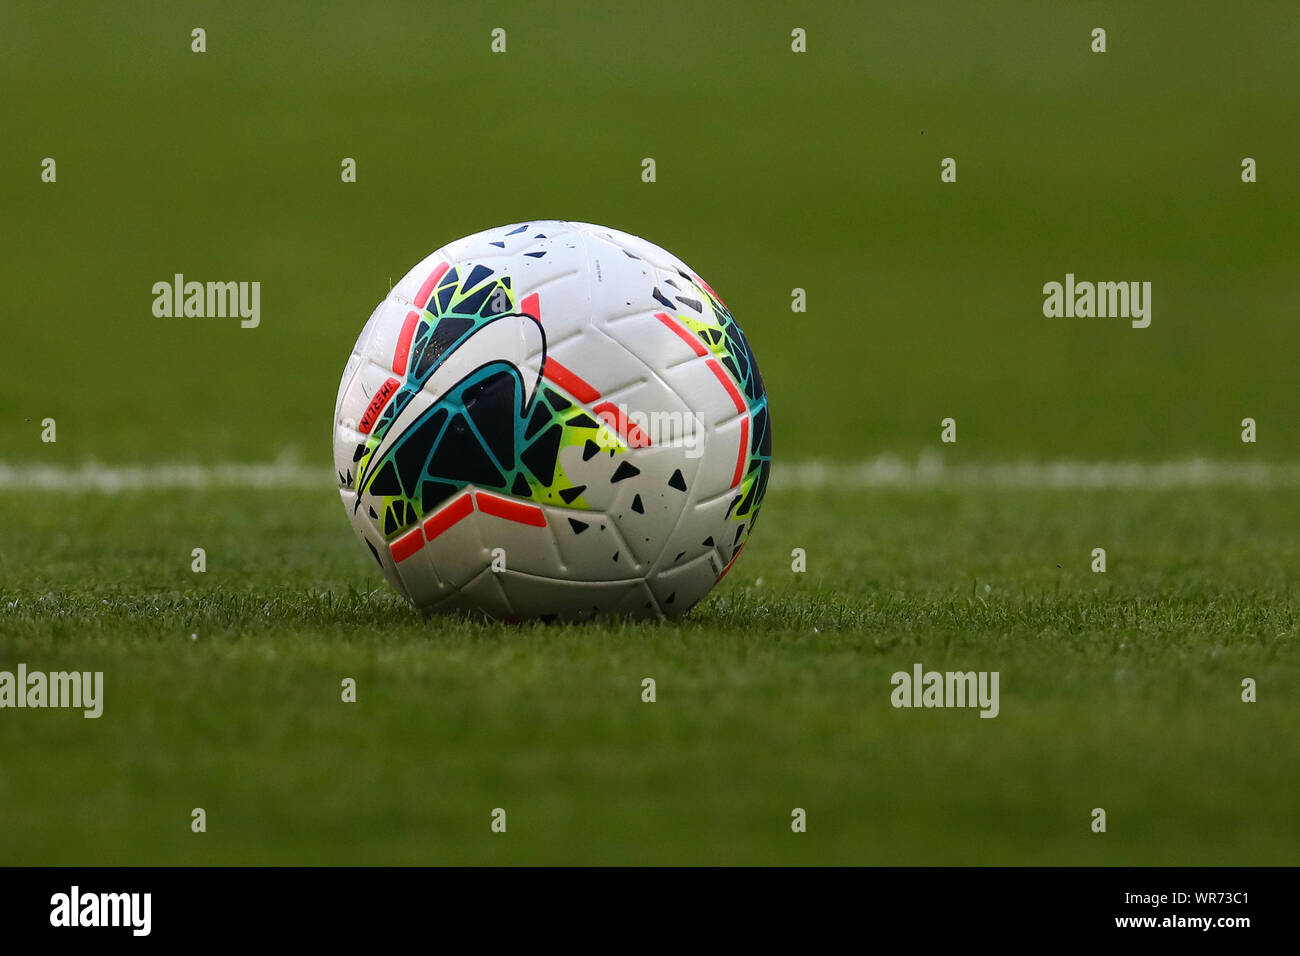 Nike Merlin Match Ball in White Obsidian Blue fury - England v Bulgaria,  UEFA Euro 2020 Qualifier - Group A, Wembley Stadium, London, UK - 7th  September 2019 Editorial Use Only Stock Photo - Alamy